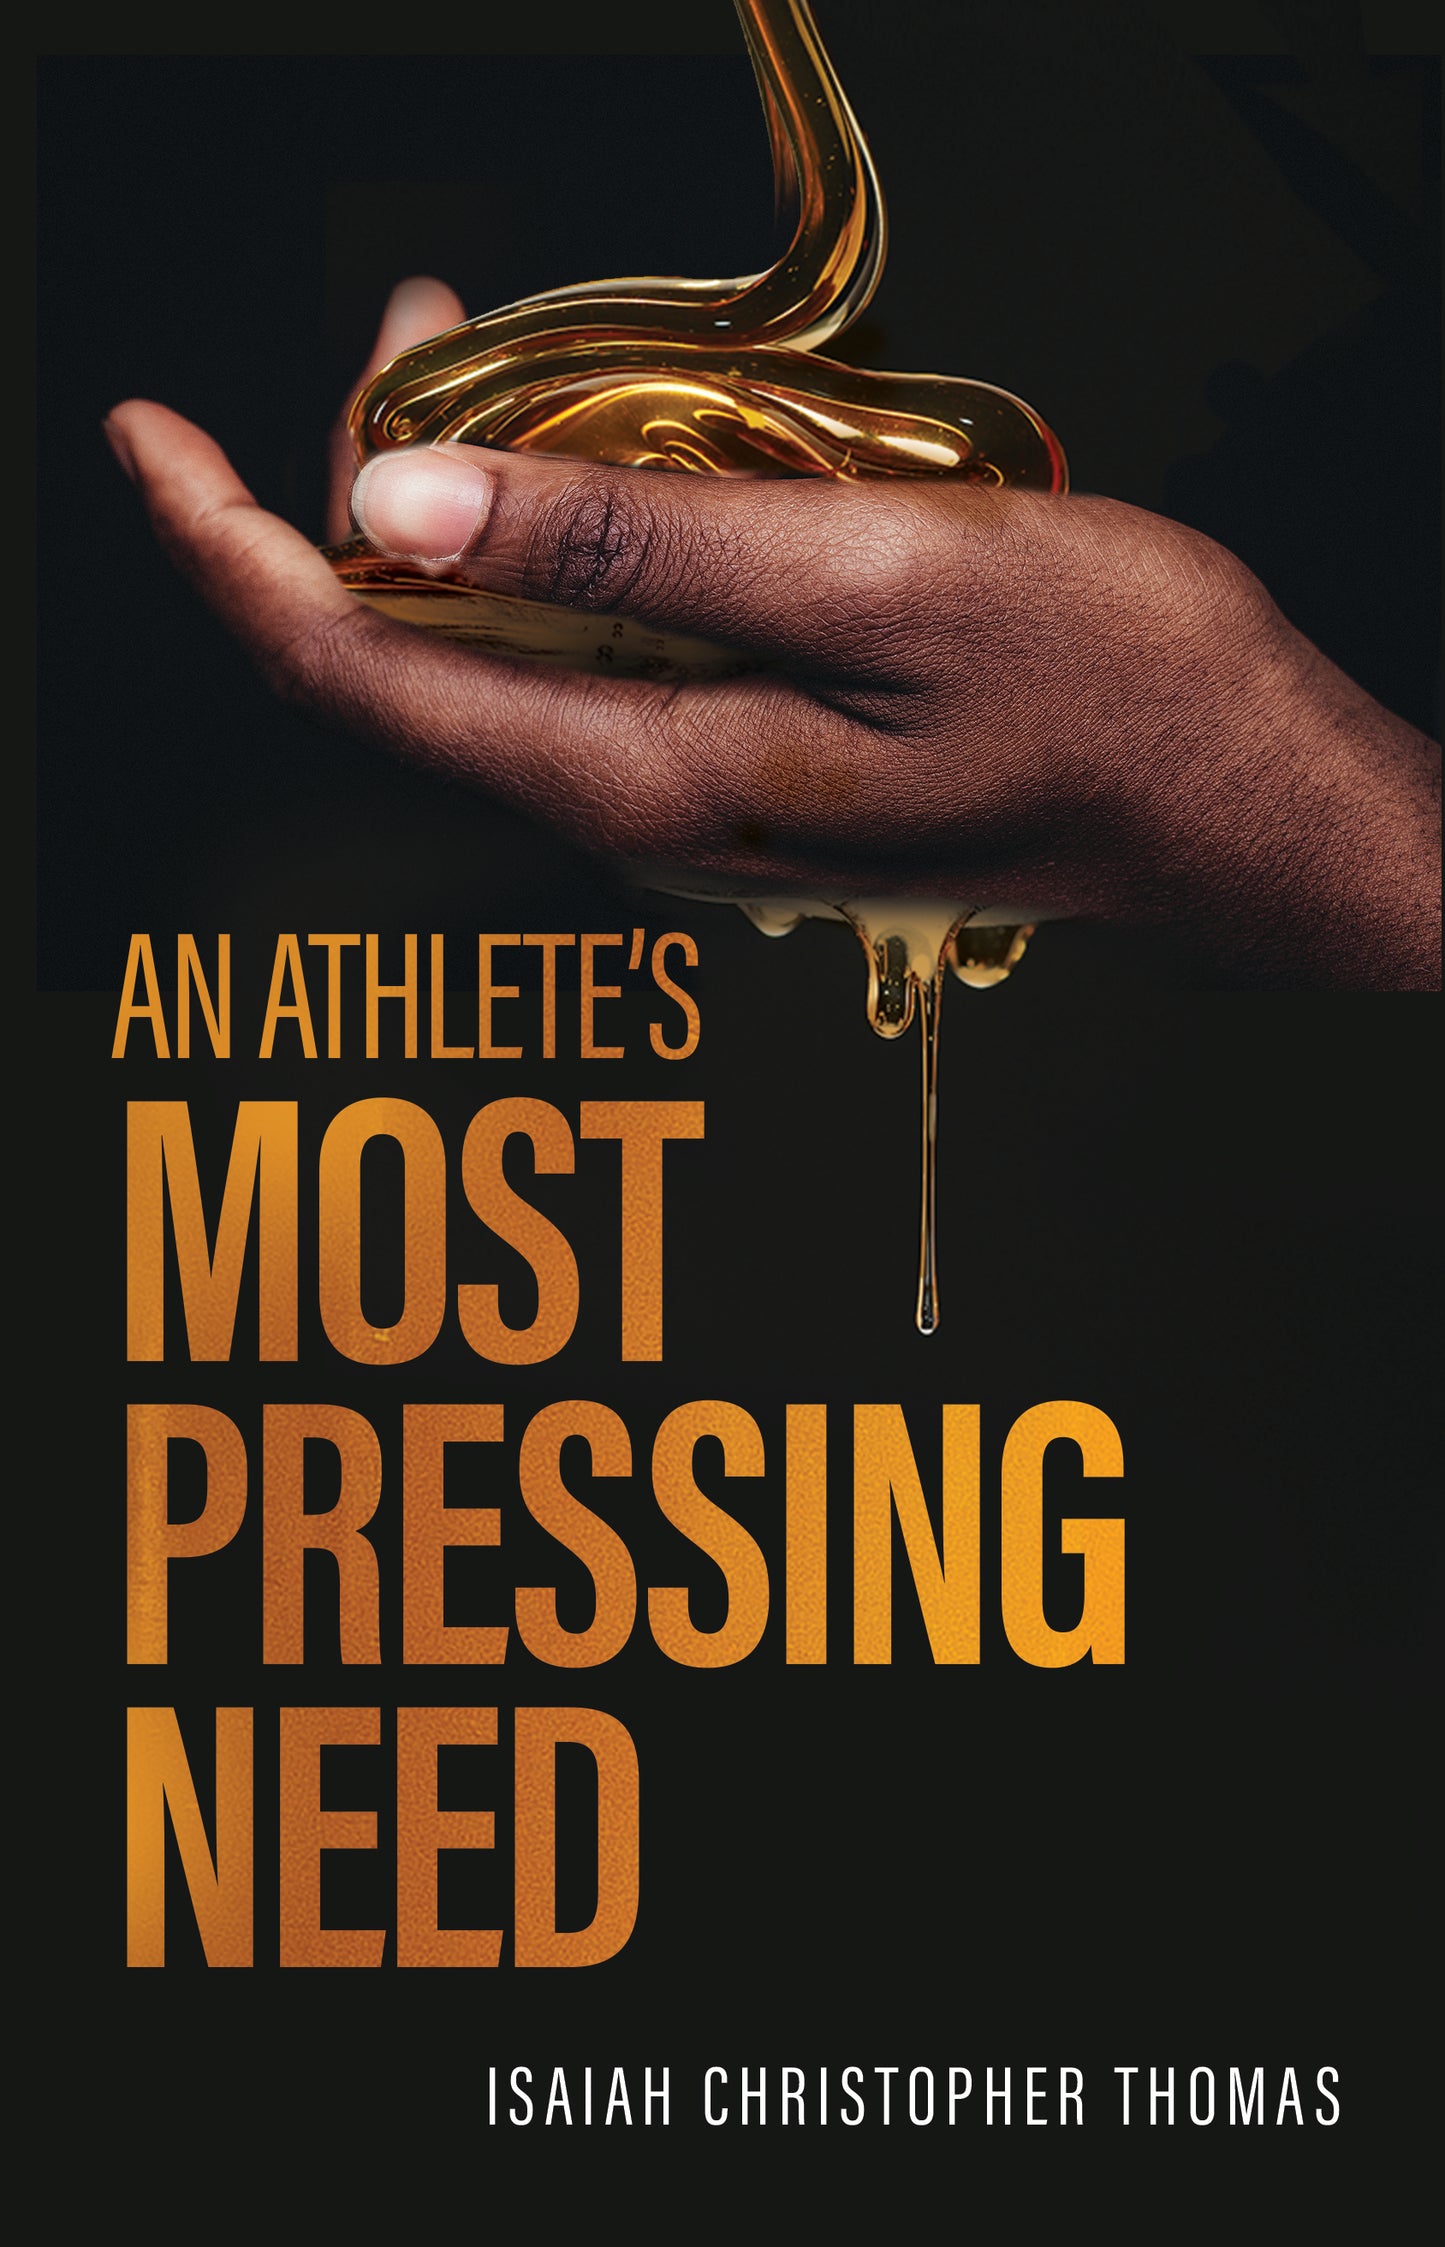 An Athlete’s Most Pressing Need